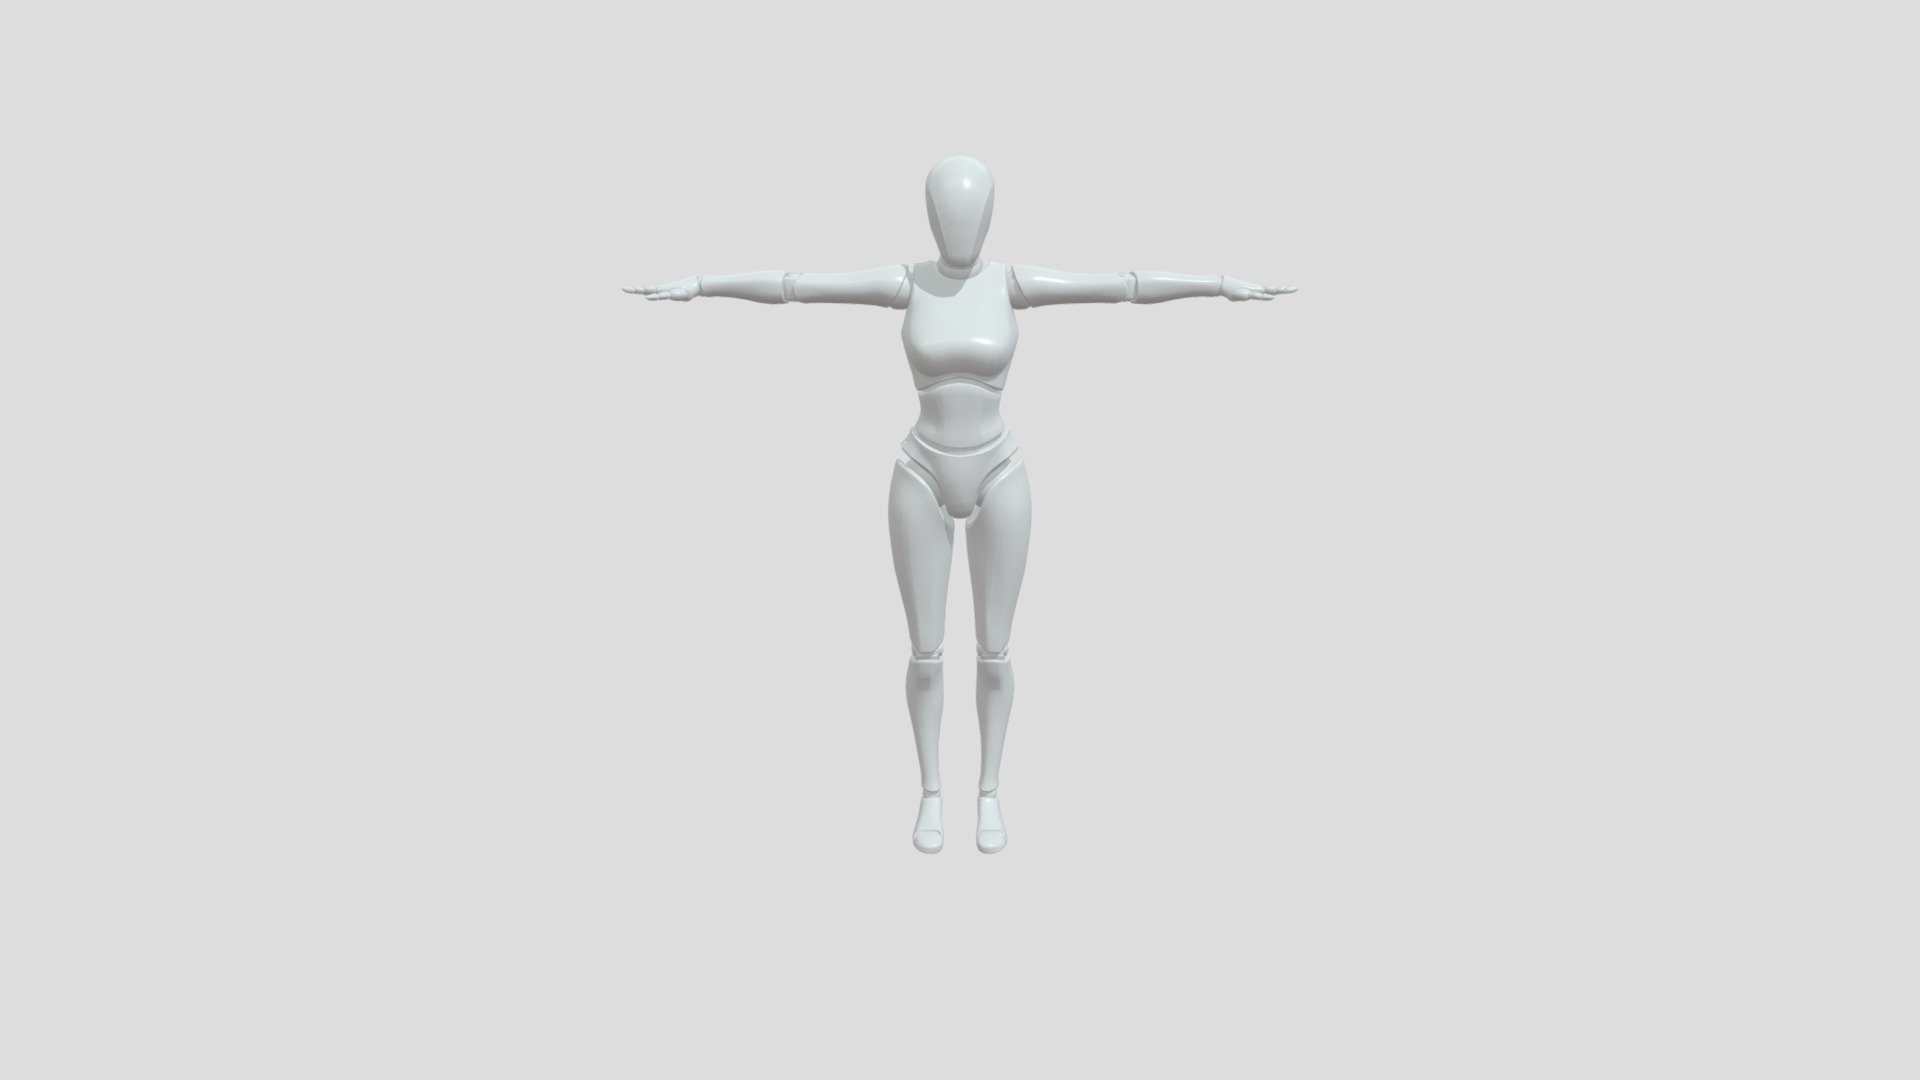 ORIGINAL MODEL : https://sketchfab.com/3d-models/mannequin-robot-female-de-unreal-engine-e1869a02b5c347258197ad6891d35cdc

Created By : https://sketchfab.com/tntpredarno

Various Changes
- Its a blend file instead of FBX.
- Fixed Rotation and Scaling issues from FBX Import
- Removed extra unneeded bones
- Fixed a glitch in the bind pose
- Every Edge was set as sharp, reset it. The went around the whole mesh setting sharp edges where I think would look good to have 3d model